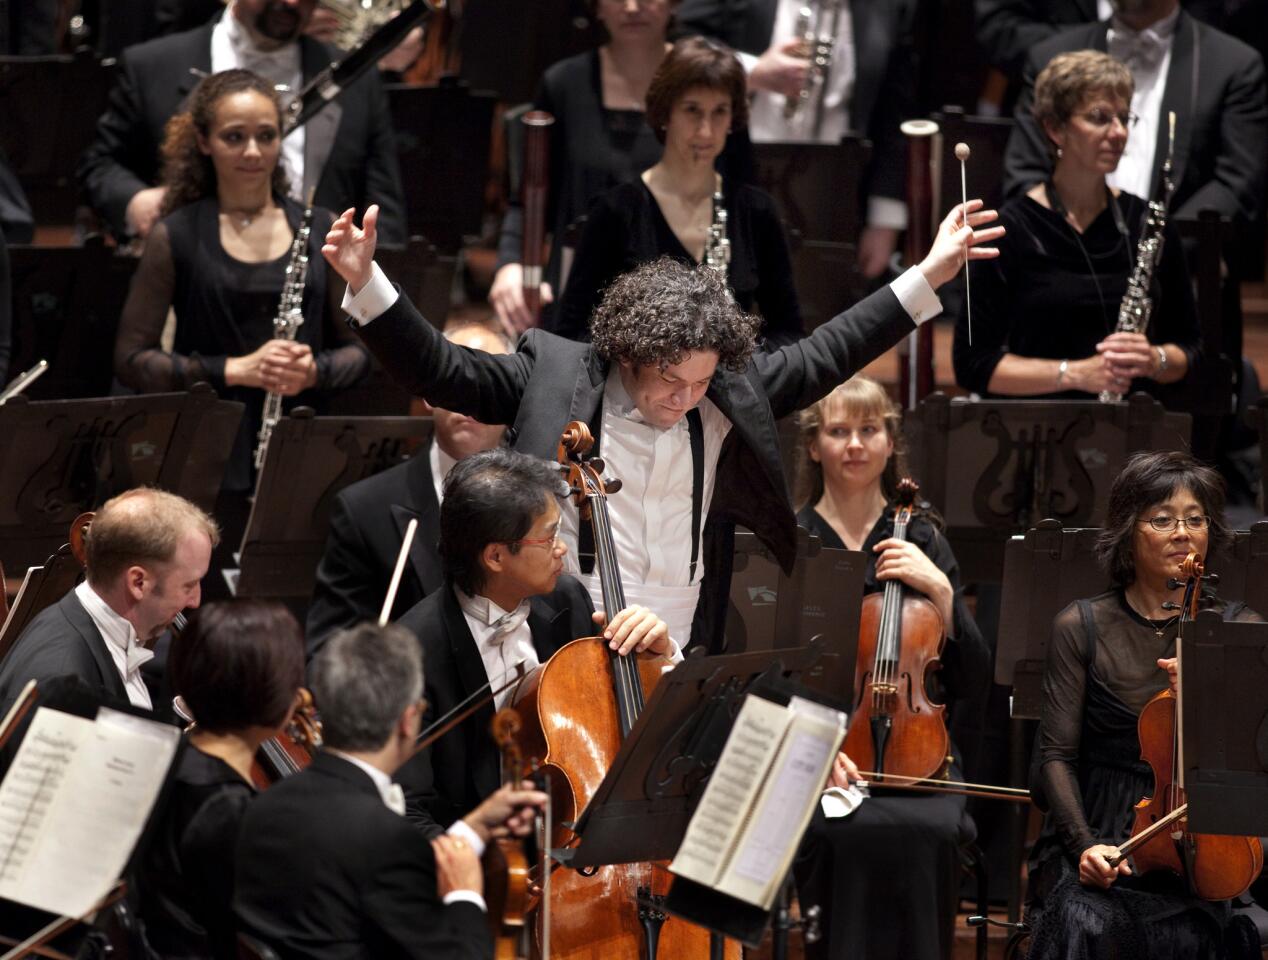 Dudamel's fall 2009 gala took a musical toll with performances that were full of fire but not yet fully focused. By the time Dudamel repeated the program the following spring, the players had become more familiar with him, and the conductor had intensified his interpretations of the scores.